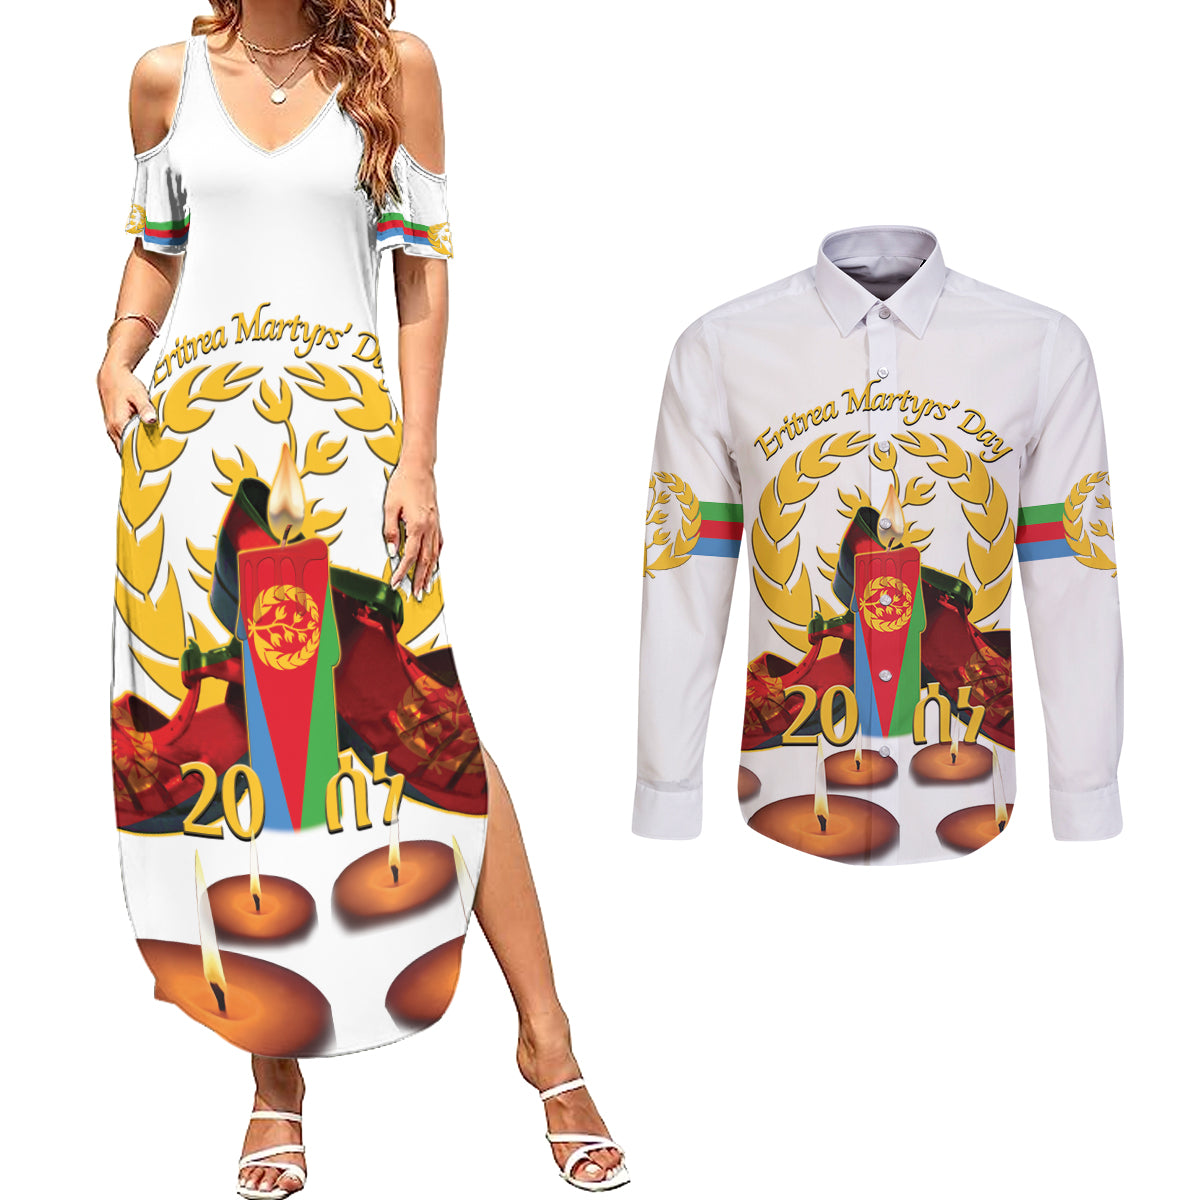 Custom Eritrea Martyrs' Day Couples Matching Summer Maxi Dress and Long Sleeve Button Shirt 20 June Shida Shoes With Candles - White